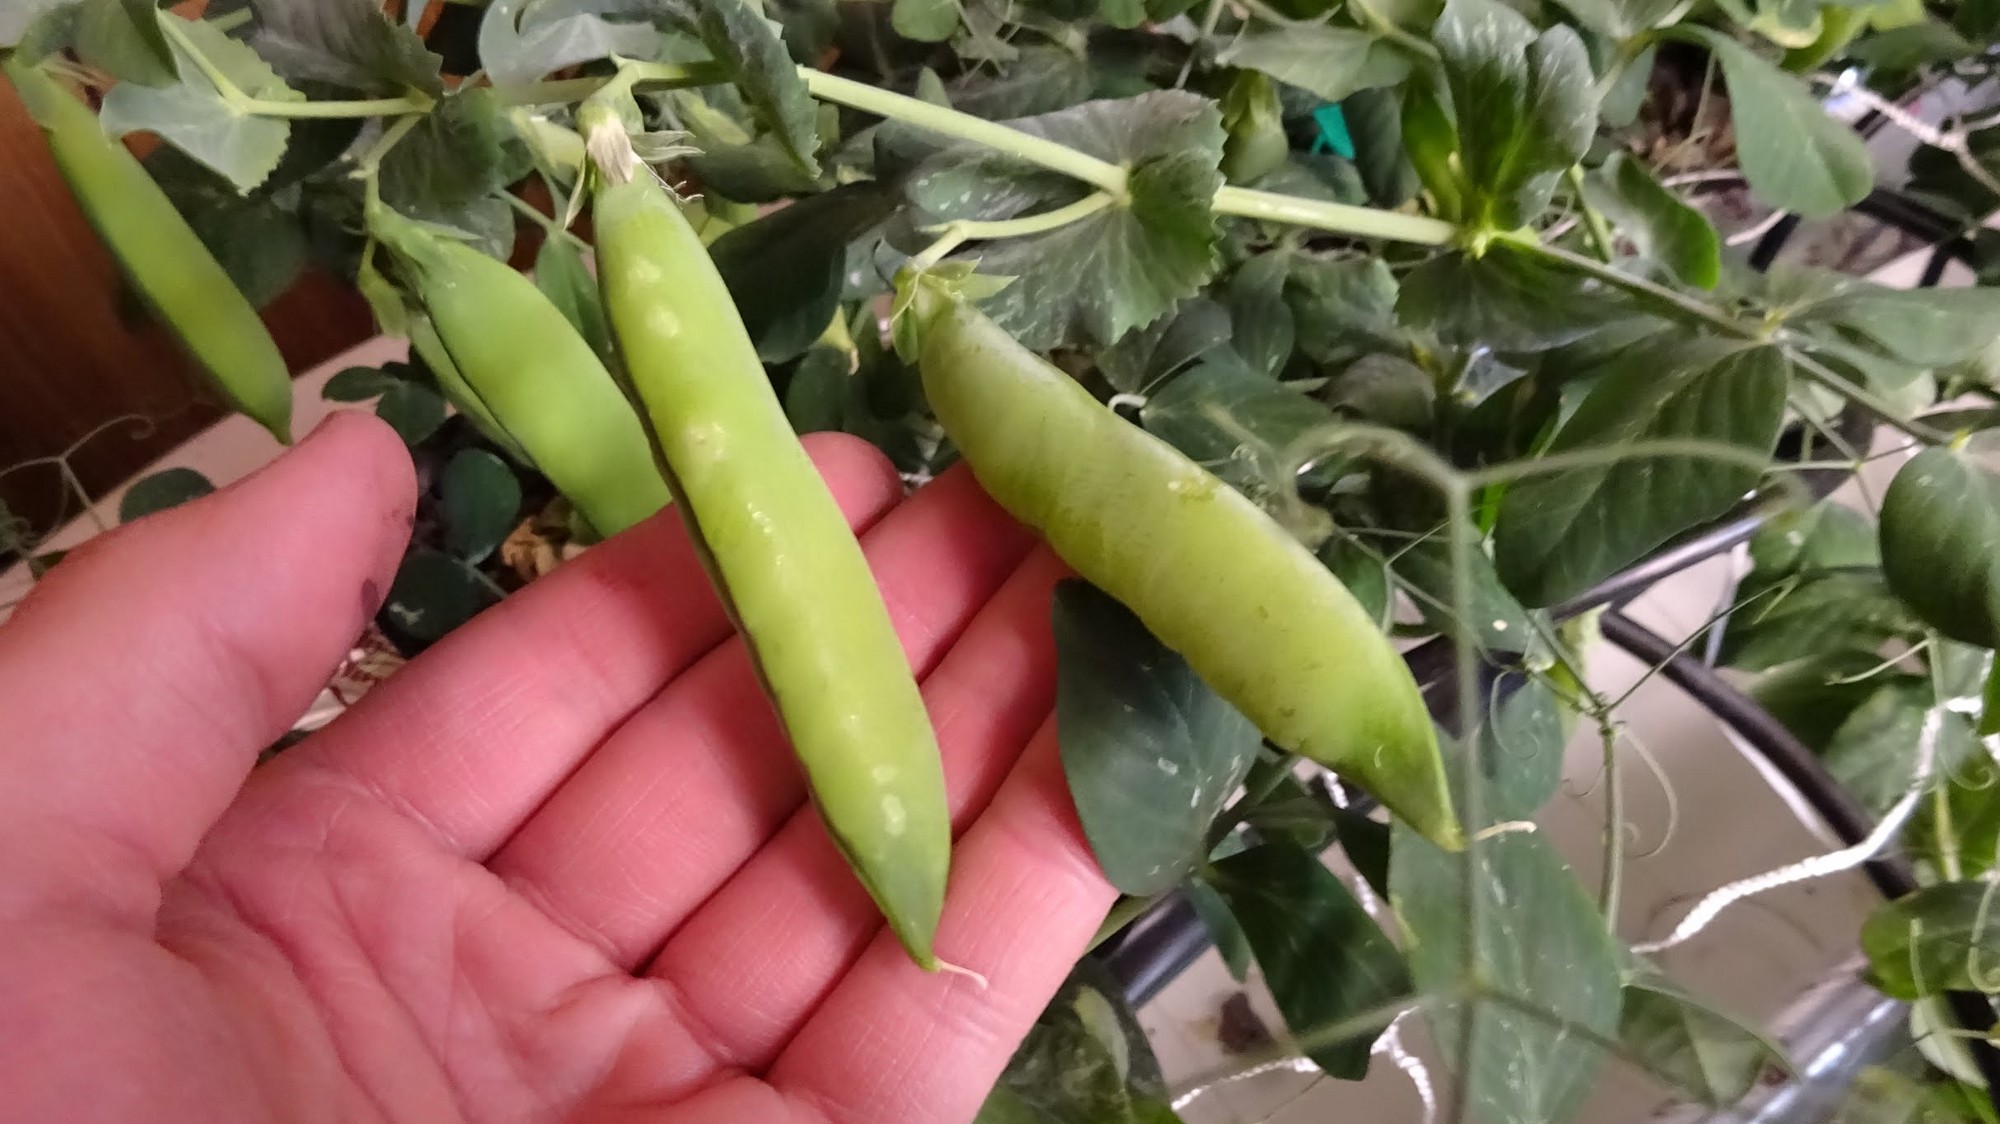 Peas are one of the best foods for homegrowers.